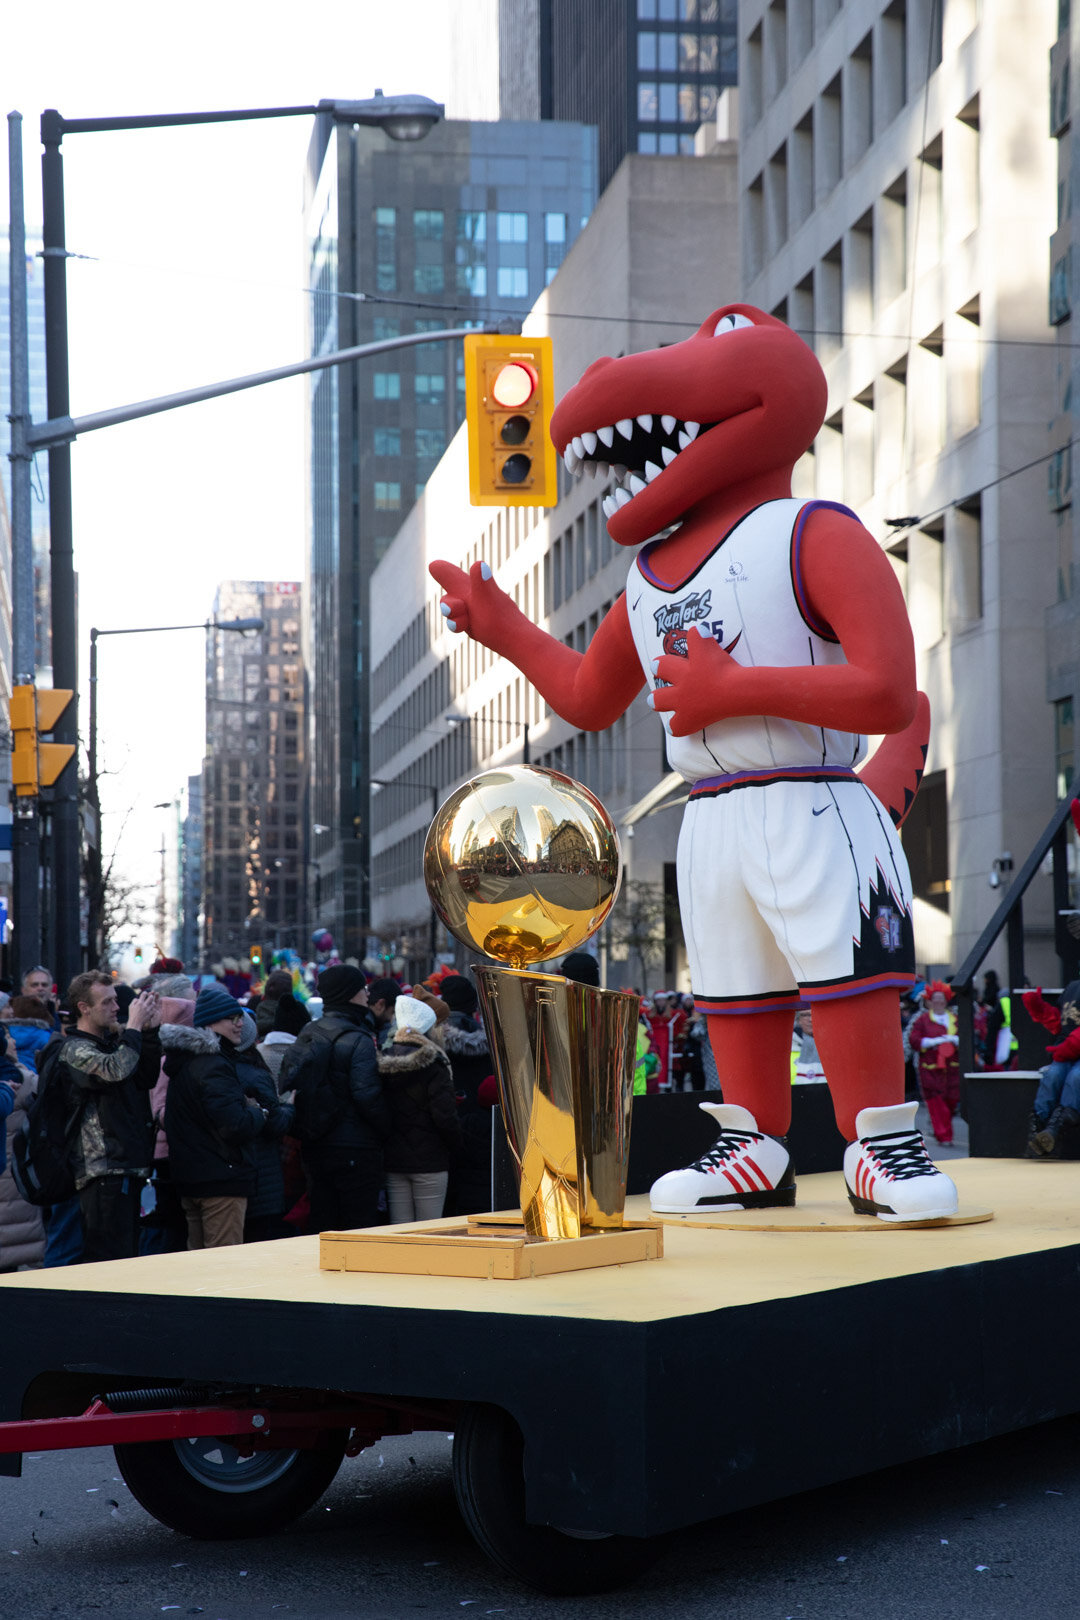  At the front of this float is the Larry O'Brien Championship Trophy which the Toronto Raptors won this past spring.  